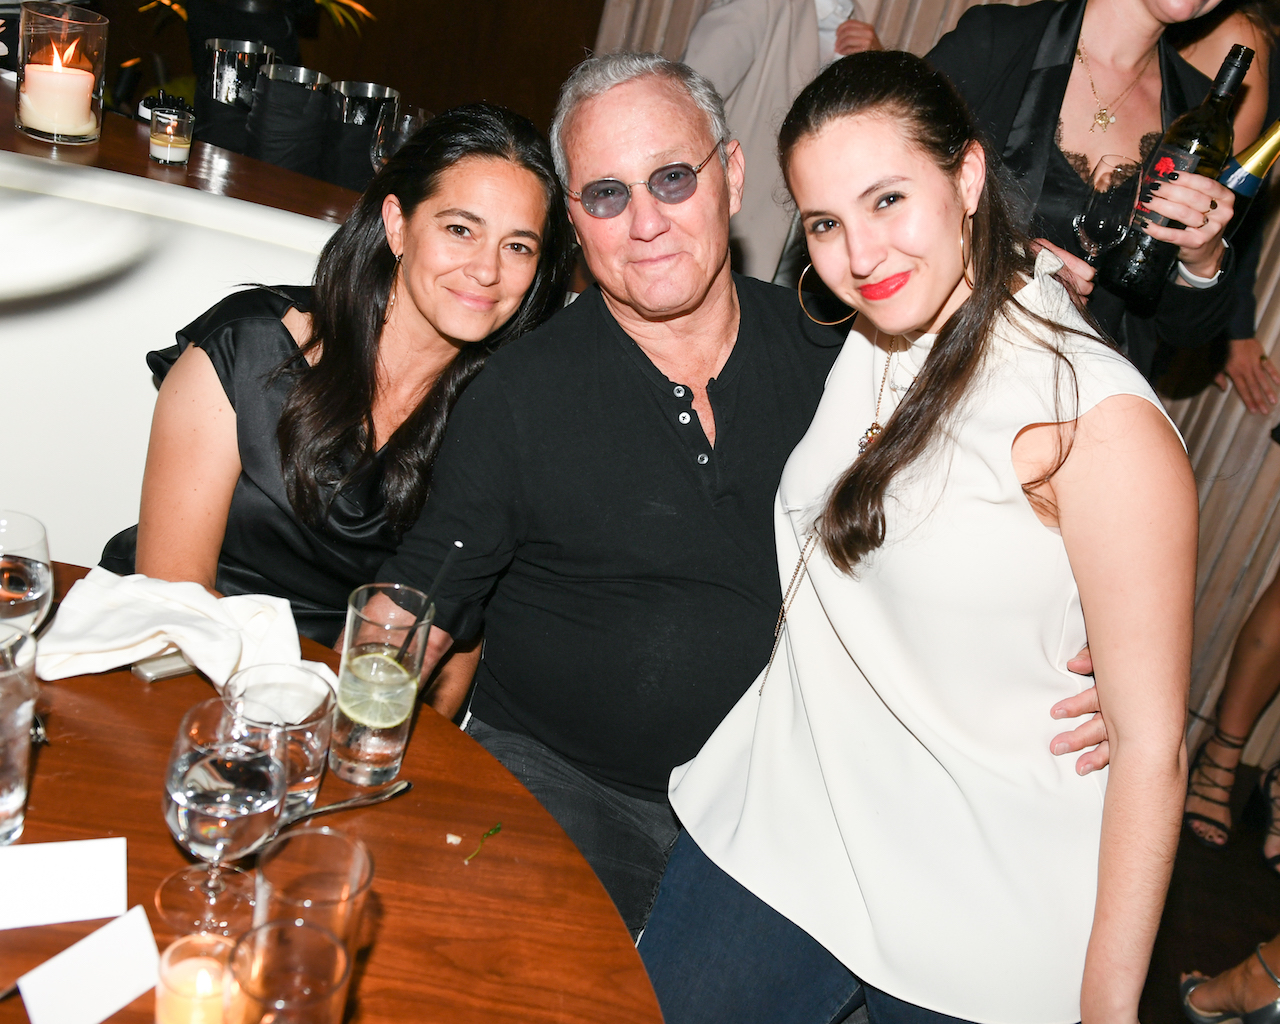 Tania Schrager, Ian Schrager, Sophia Schrager at the opening of the West Hollywood EDITION